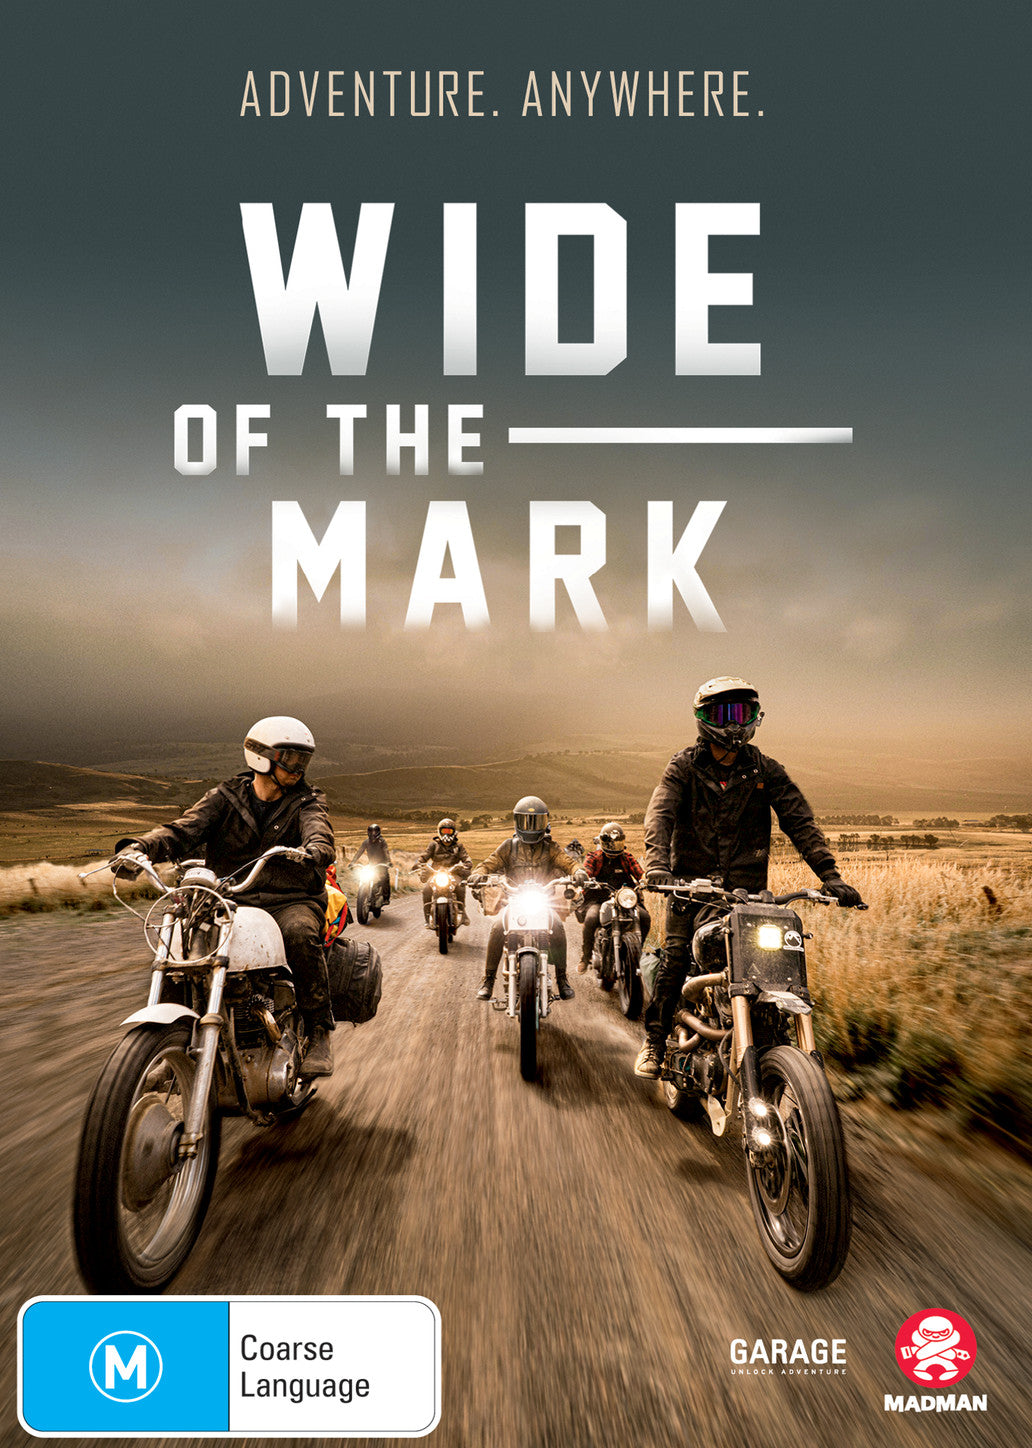 WIDE OF THE MARK